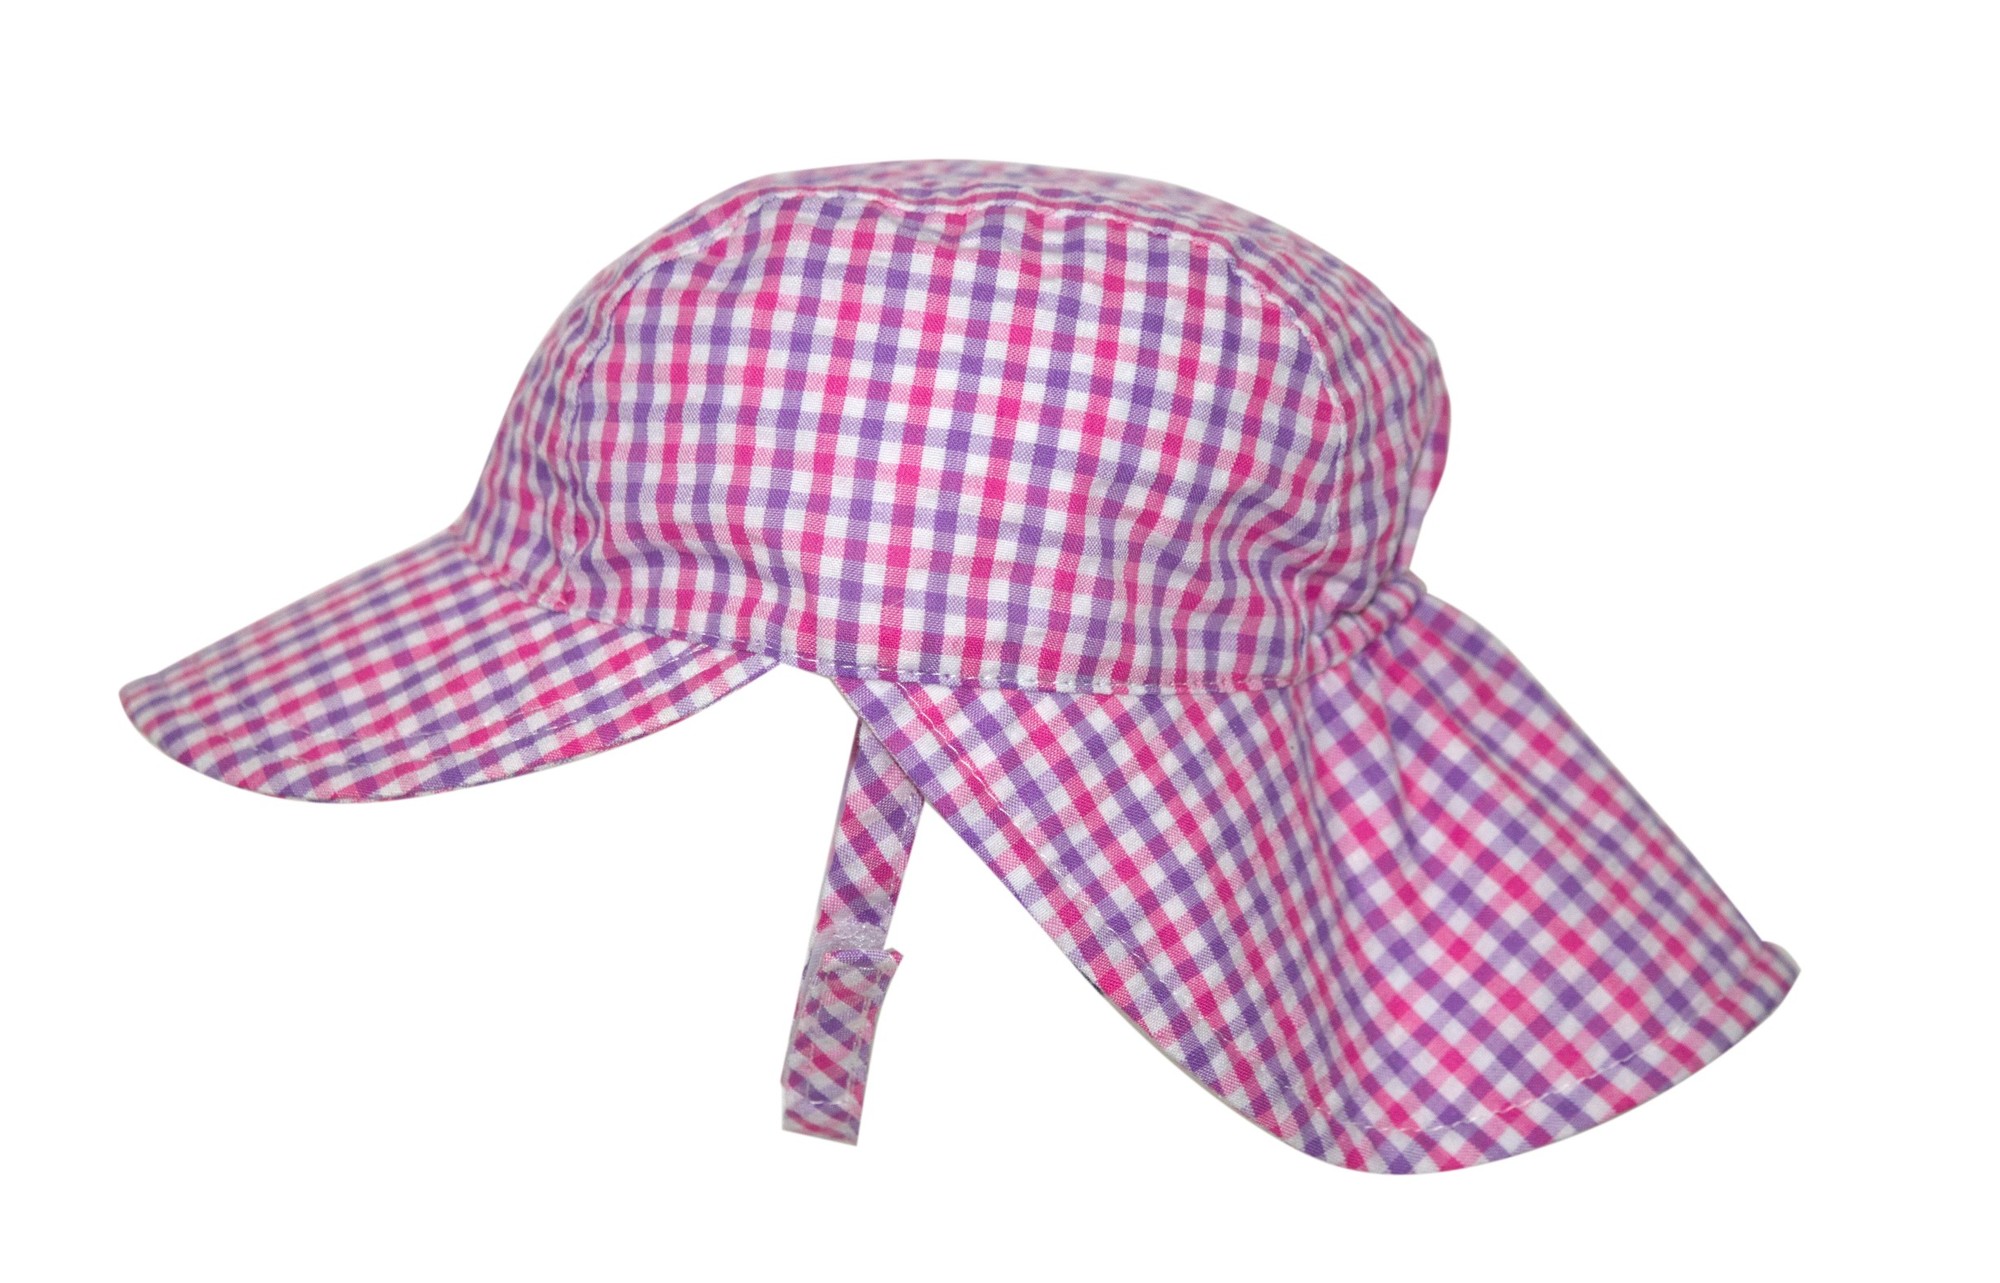 Rigon - UV sun cap for babies with neck flap - Pink gingham